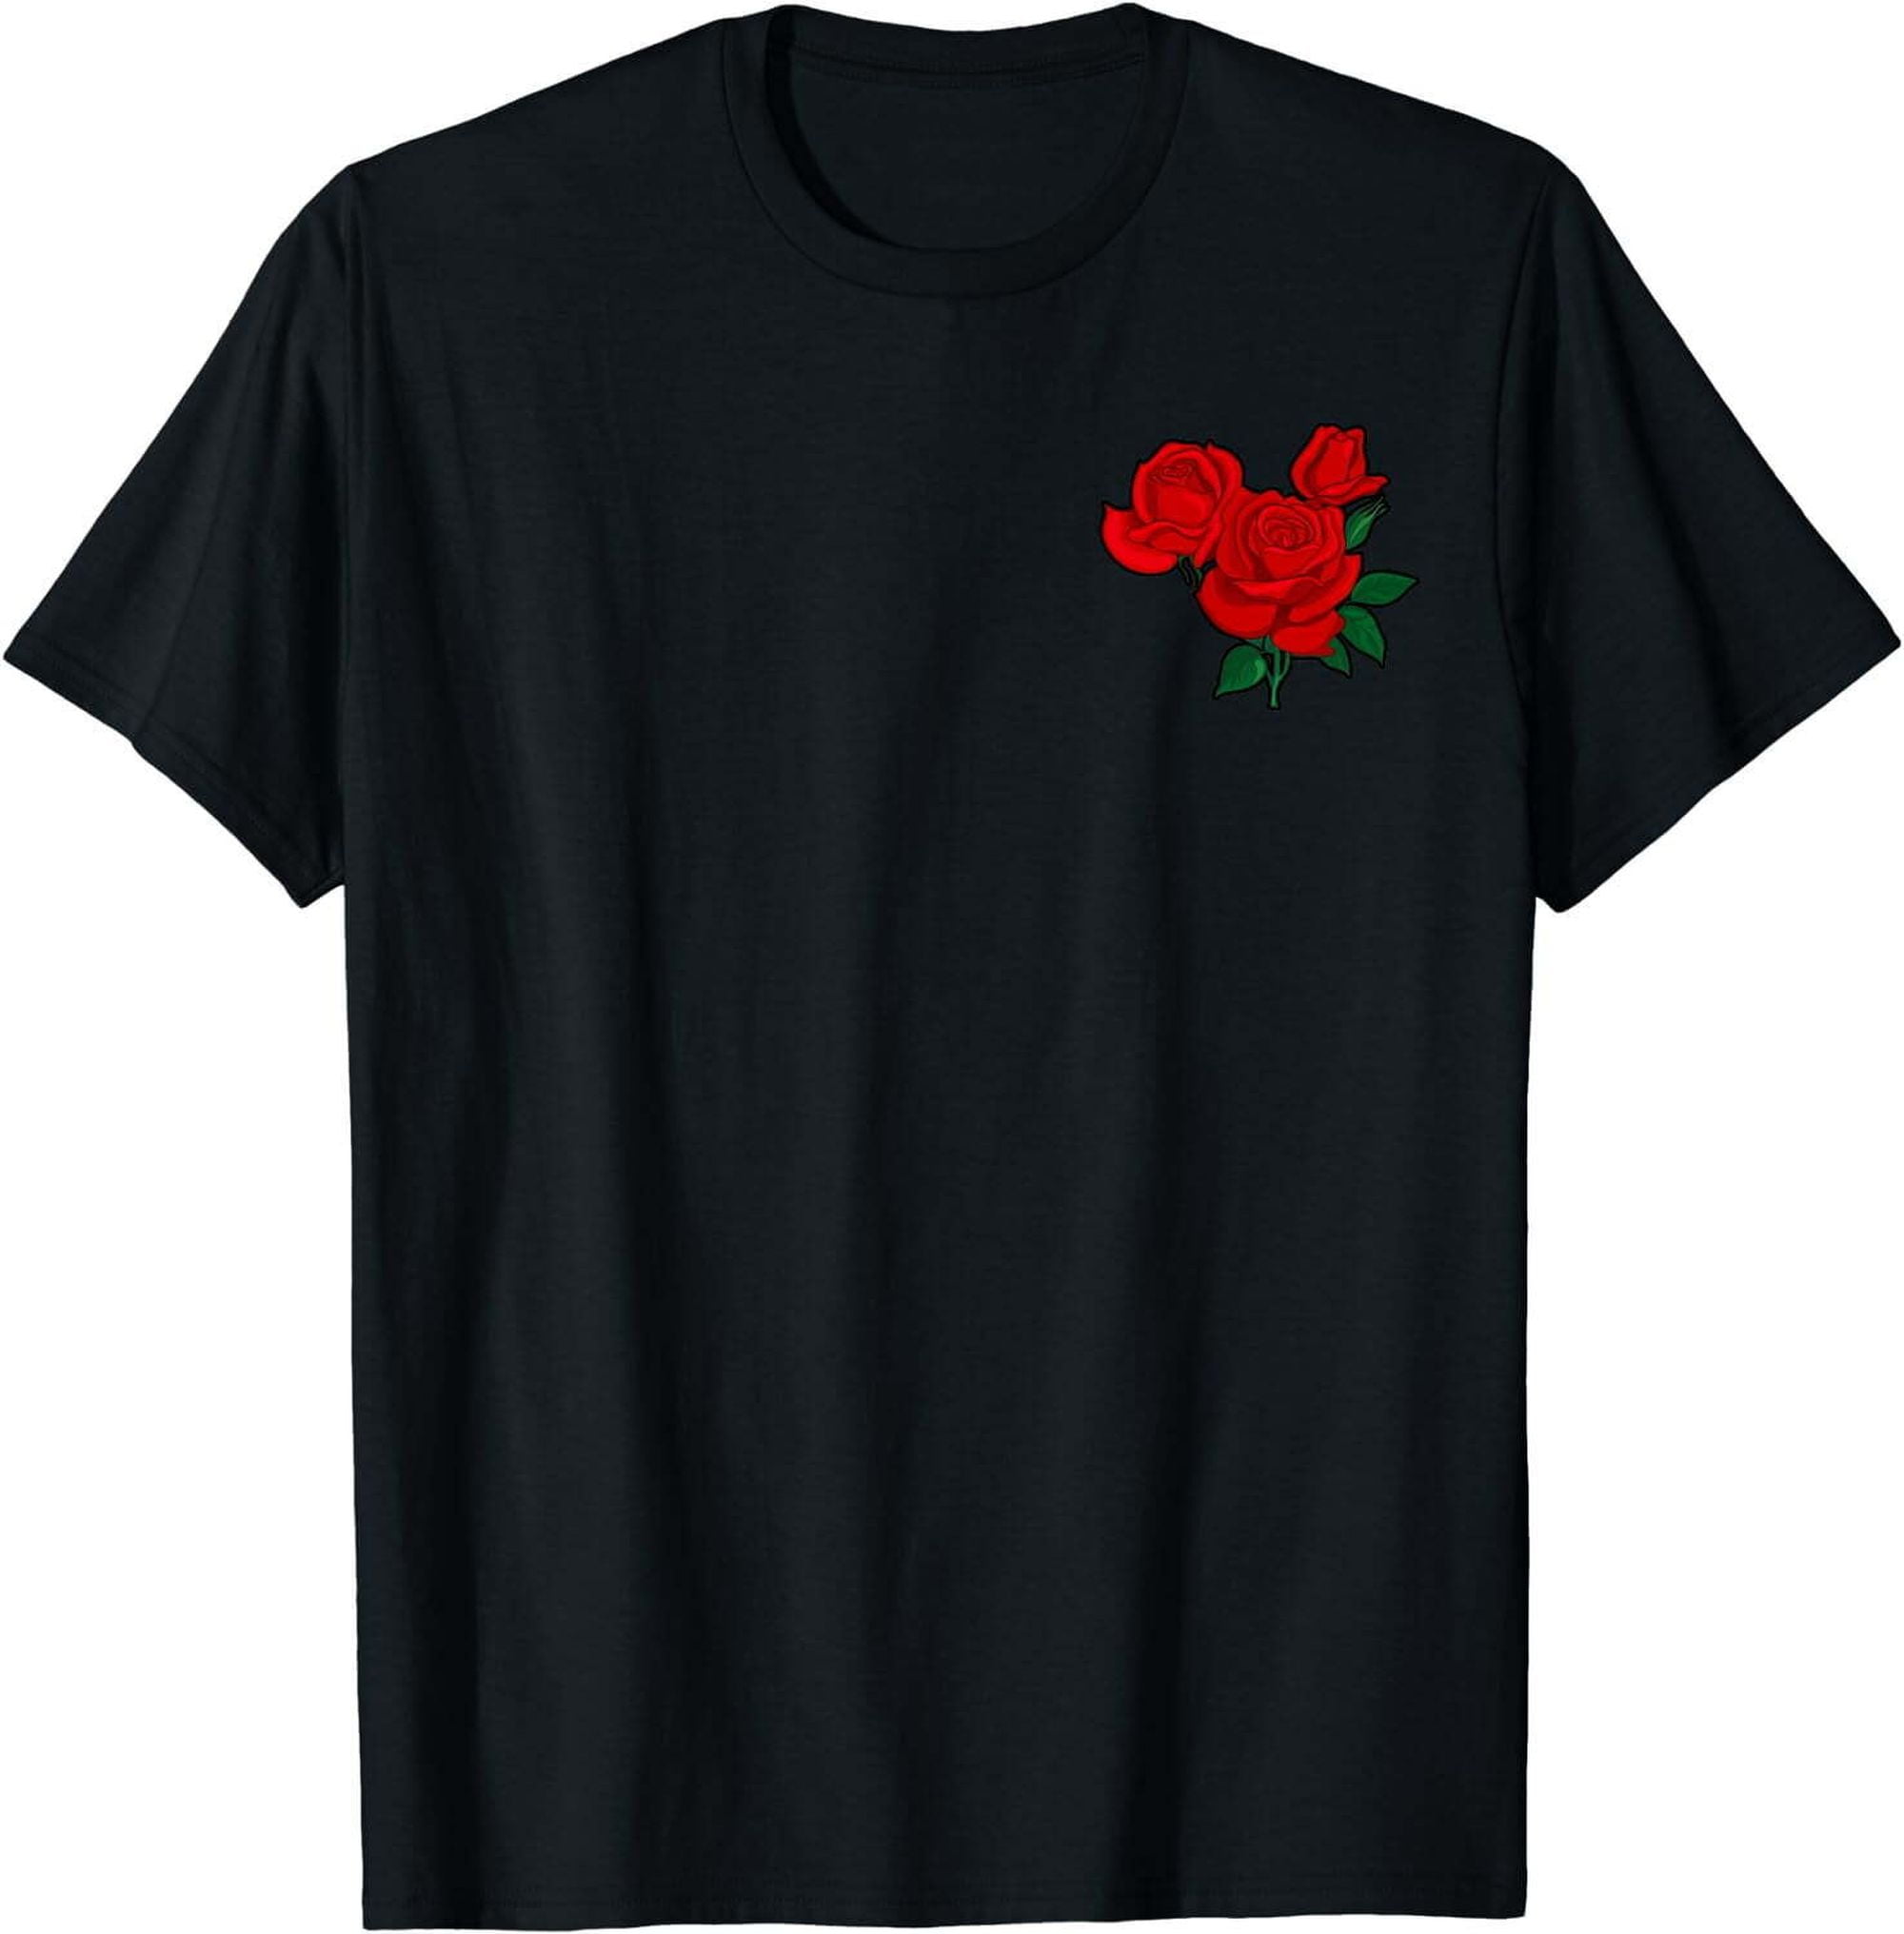 Versatile Red Rose T-Shirt: A Timeless Floral Design for Everyone ...